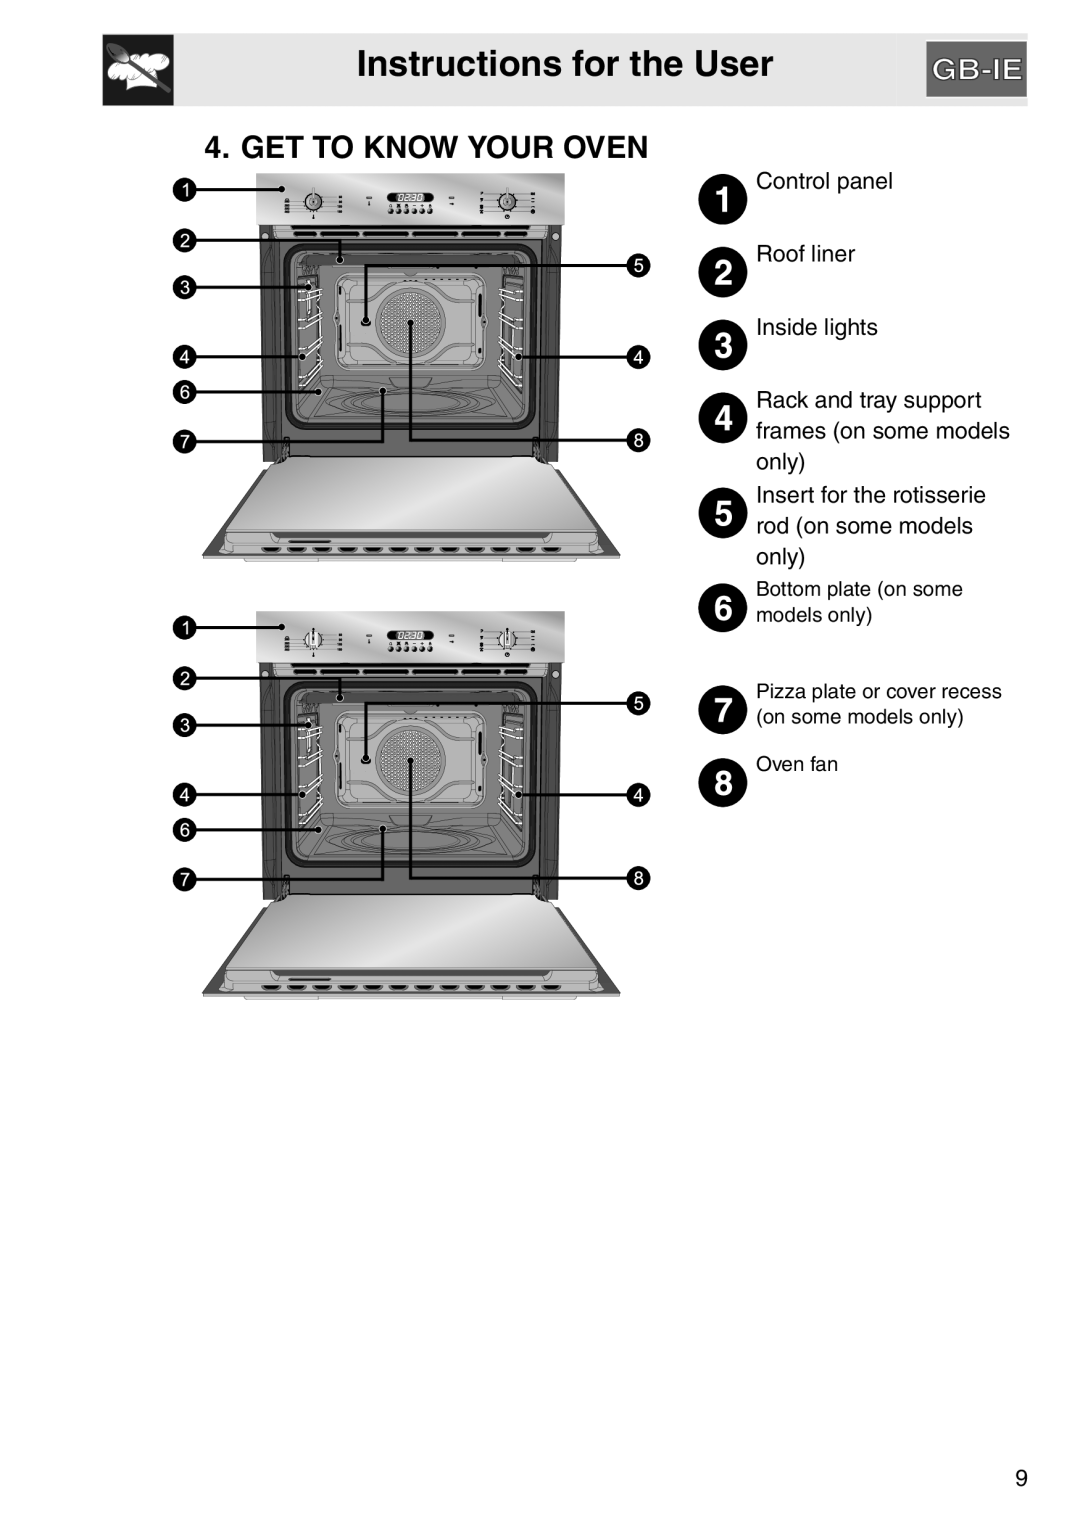 Smeg electric oven Instructions for the User, Get To Know Your Oven, Pizza plate or cover recess on some models only 